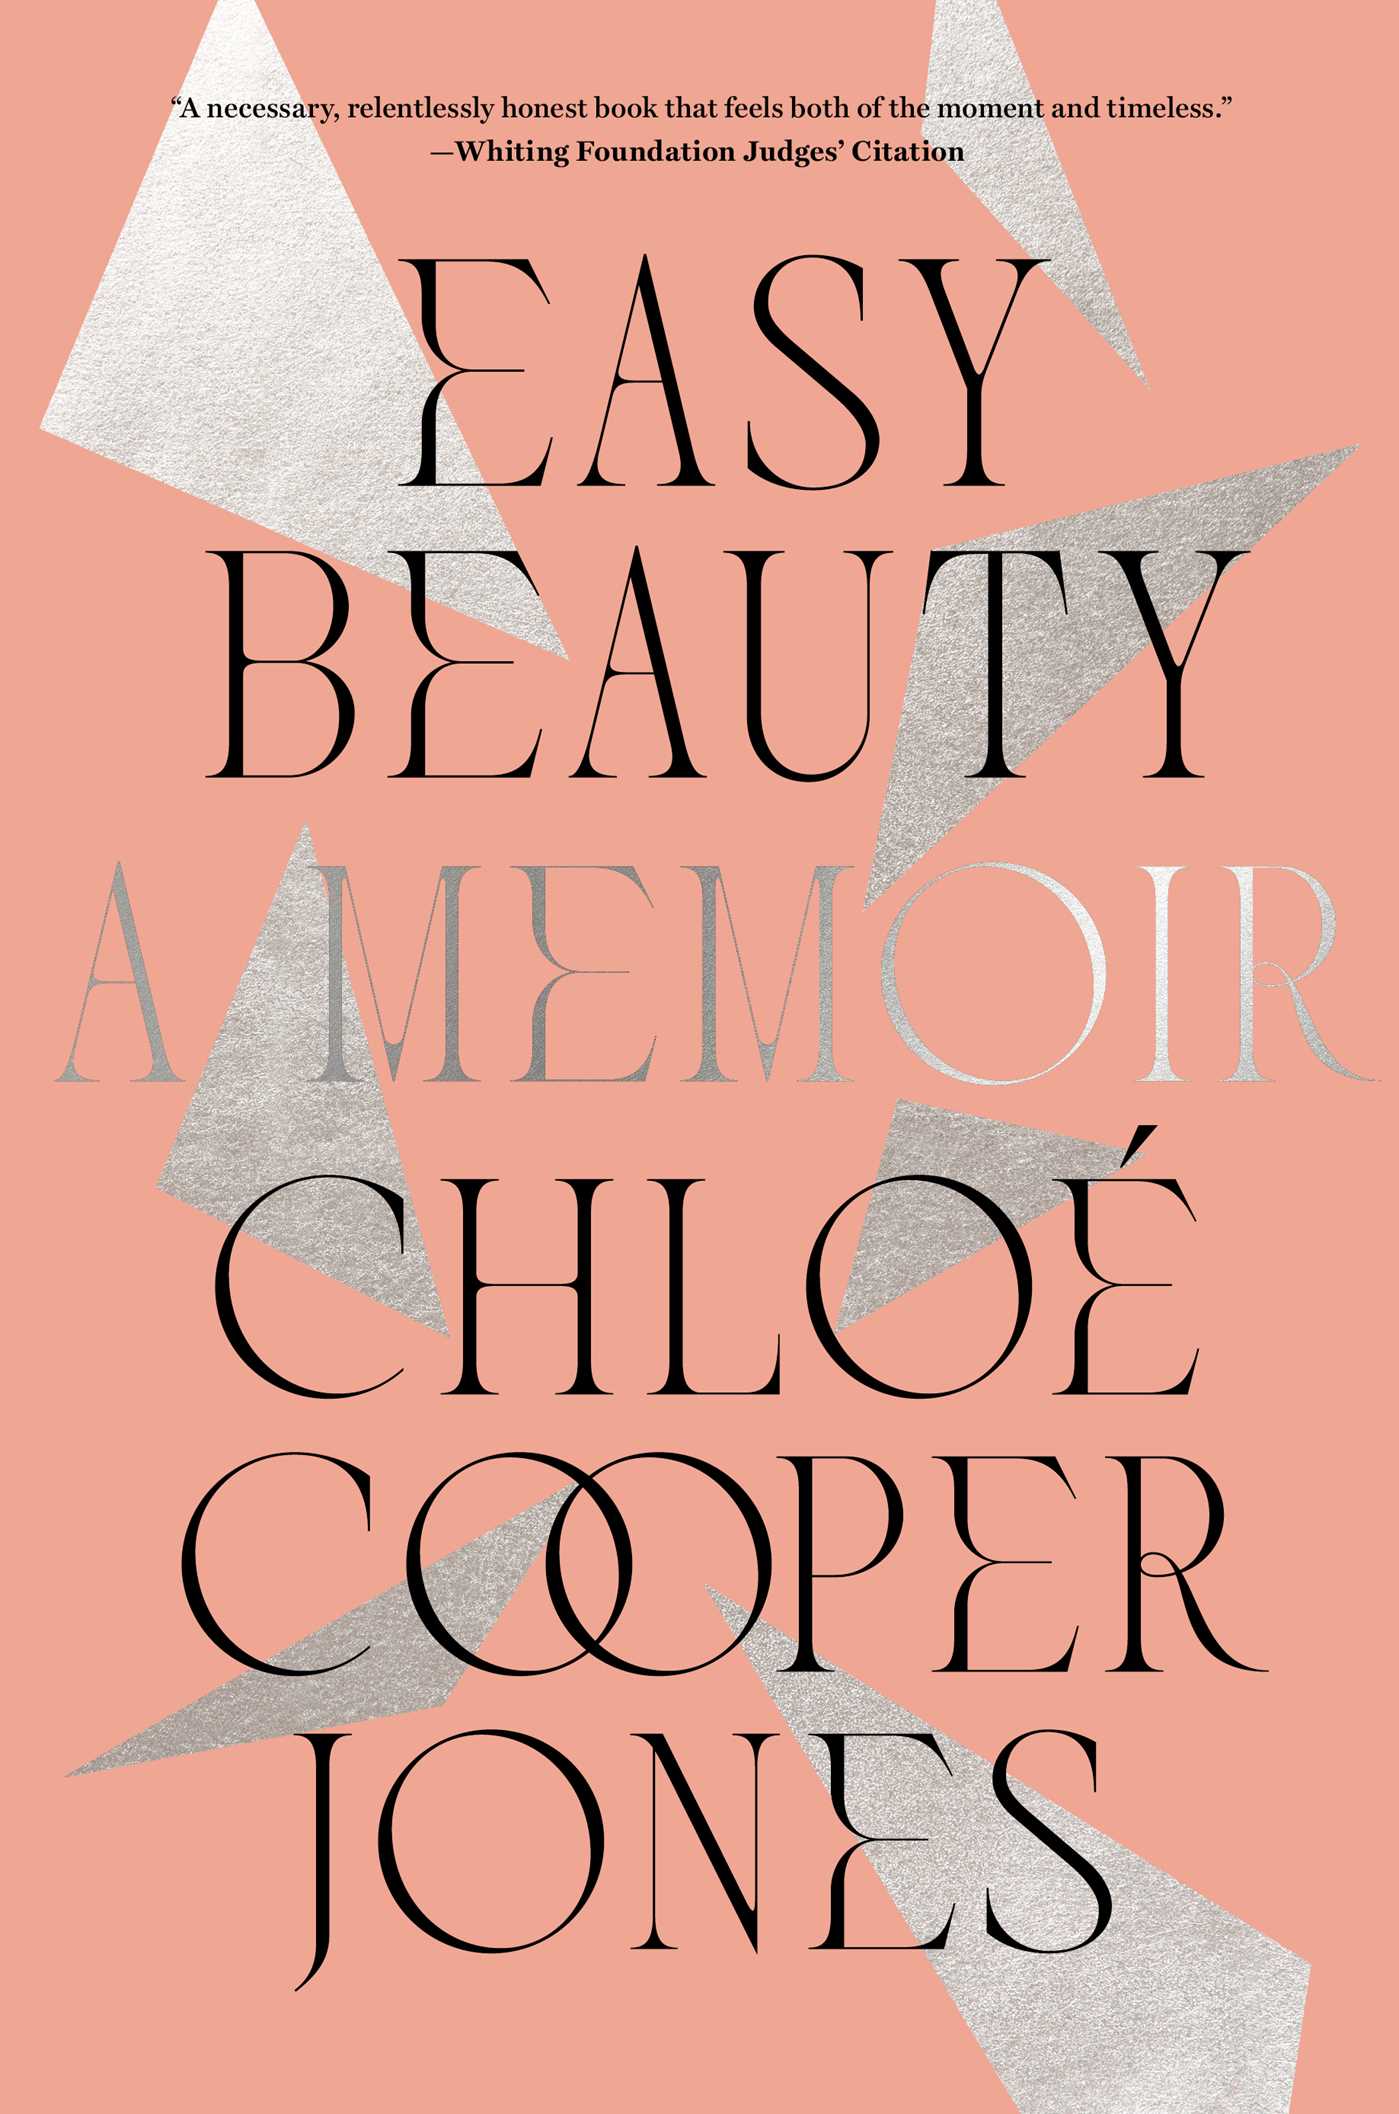 A graphic featuring the cover of Easy Beauty